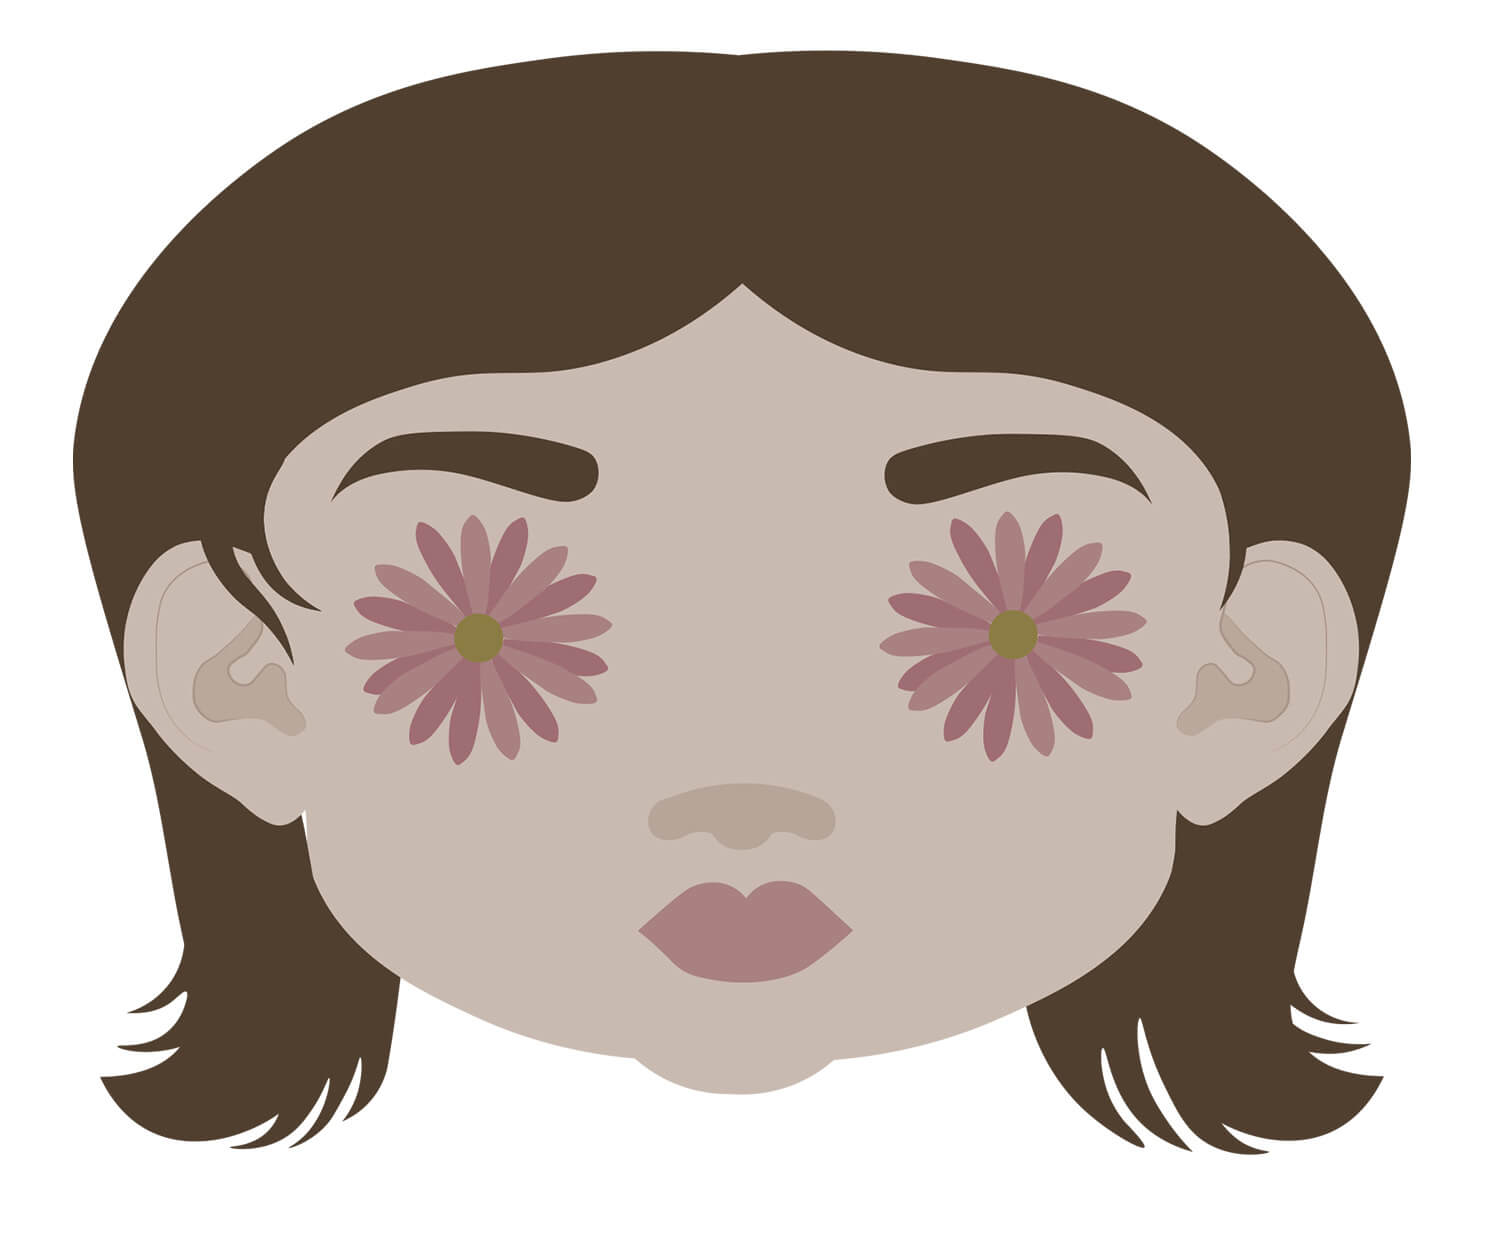 Illustrated girl with flowers in her eyes